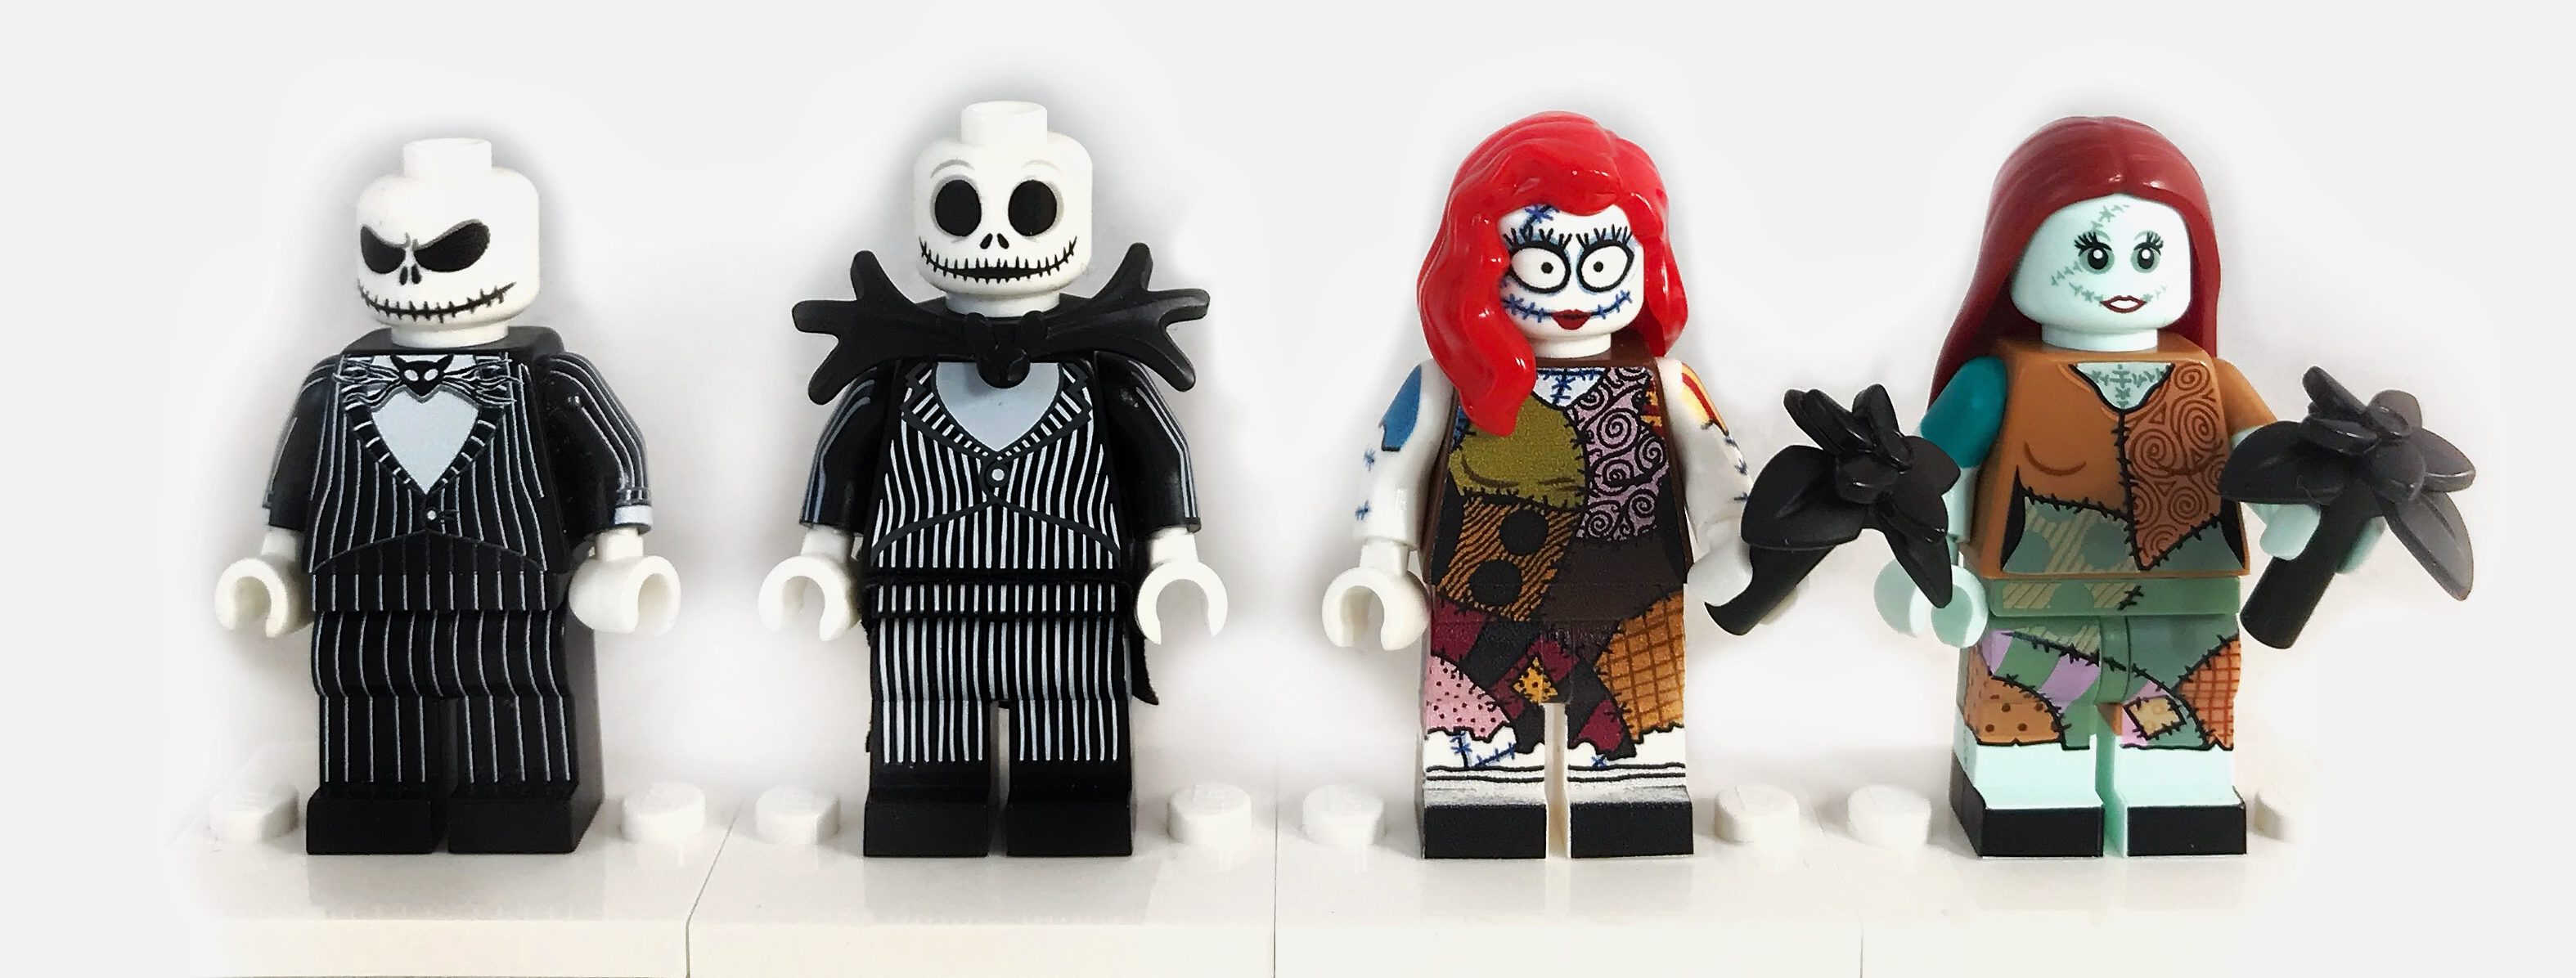 Disney LEGO Minifigures Review - Two Lost Boys Blog